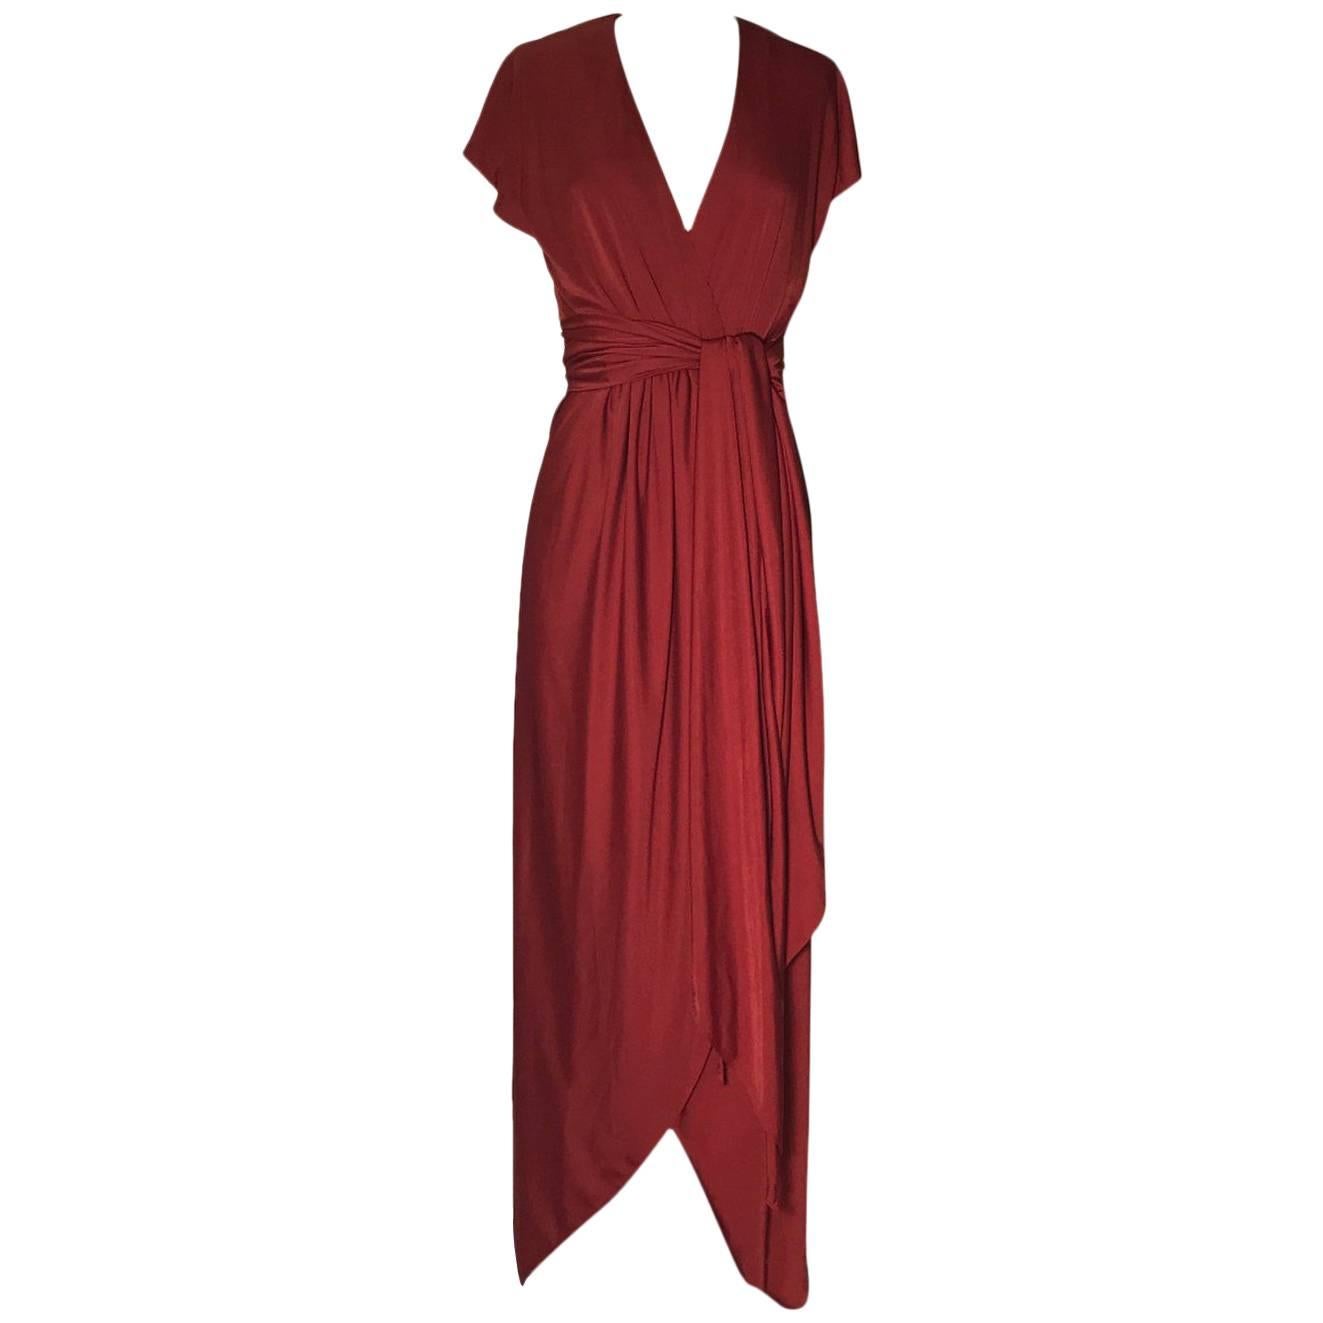 Halston IV 1980s Vintage Rust Red Jersey Belted Wrap Dress